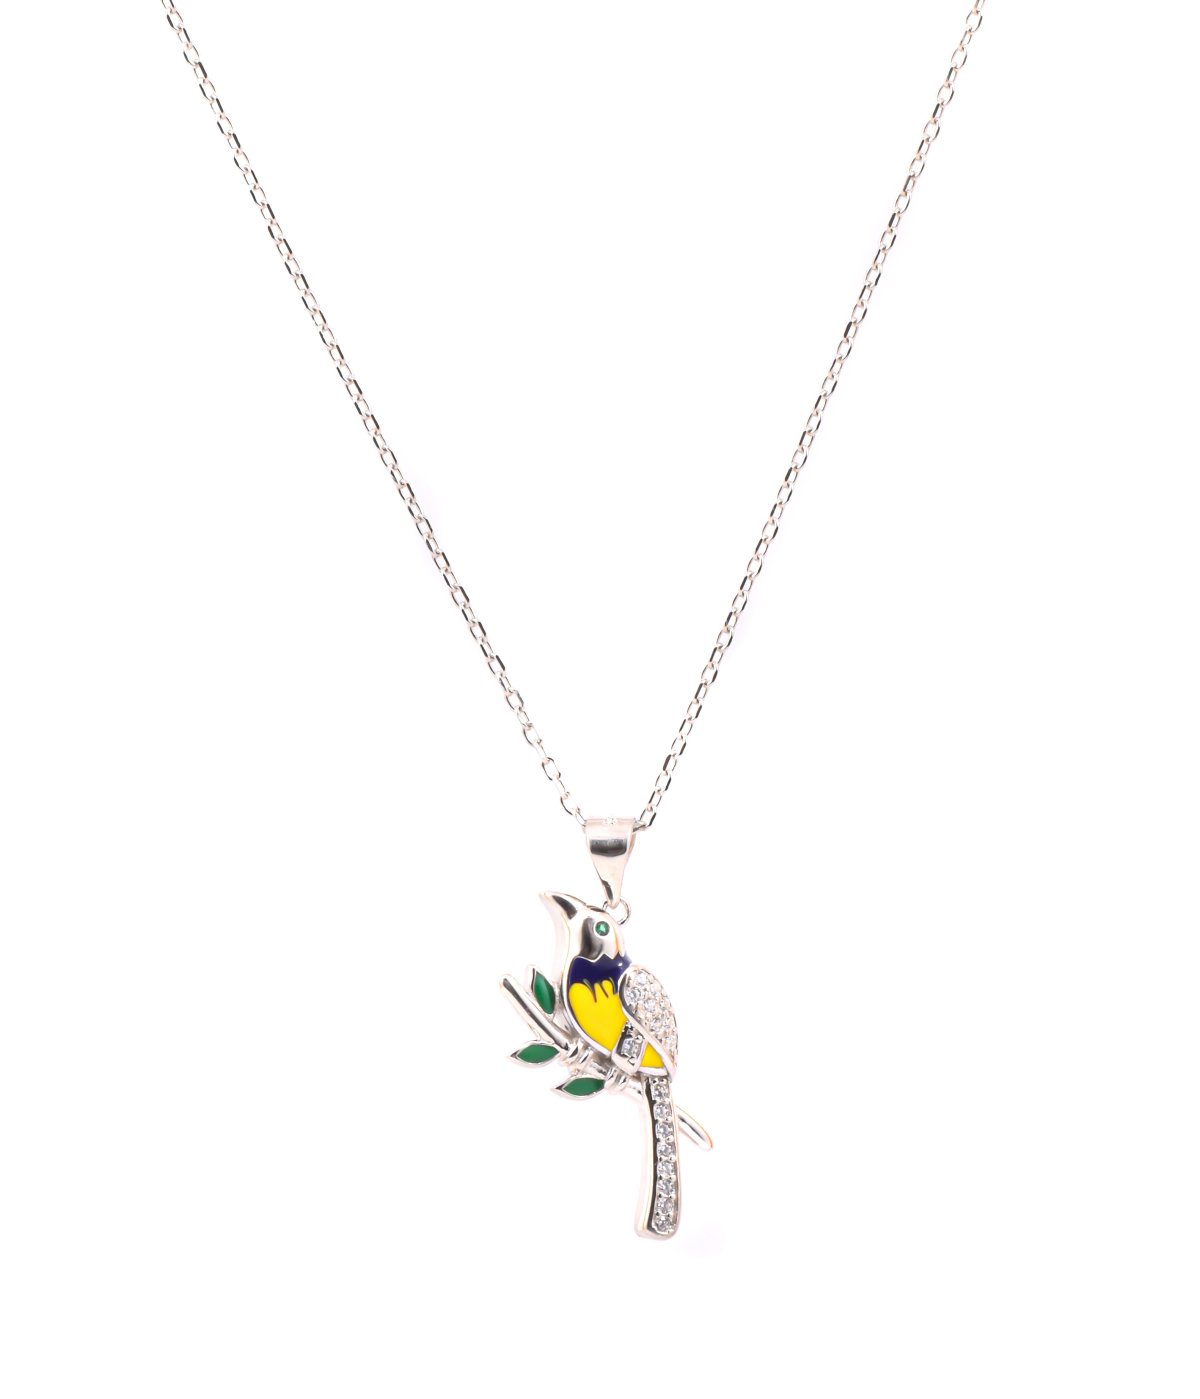 S925 Sterling Silver Chain for Women with Hummingbird Pendant Embelished with Beautiful Crystals